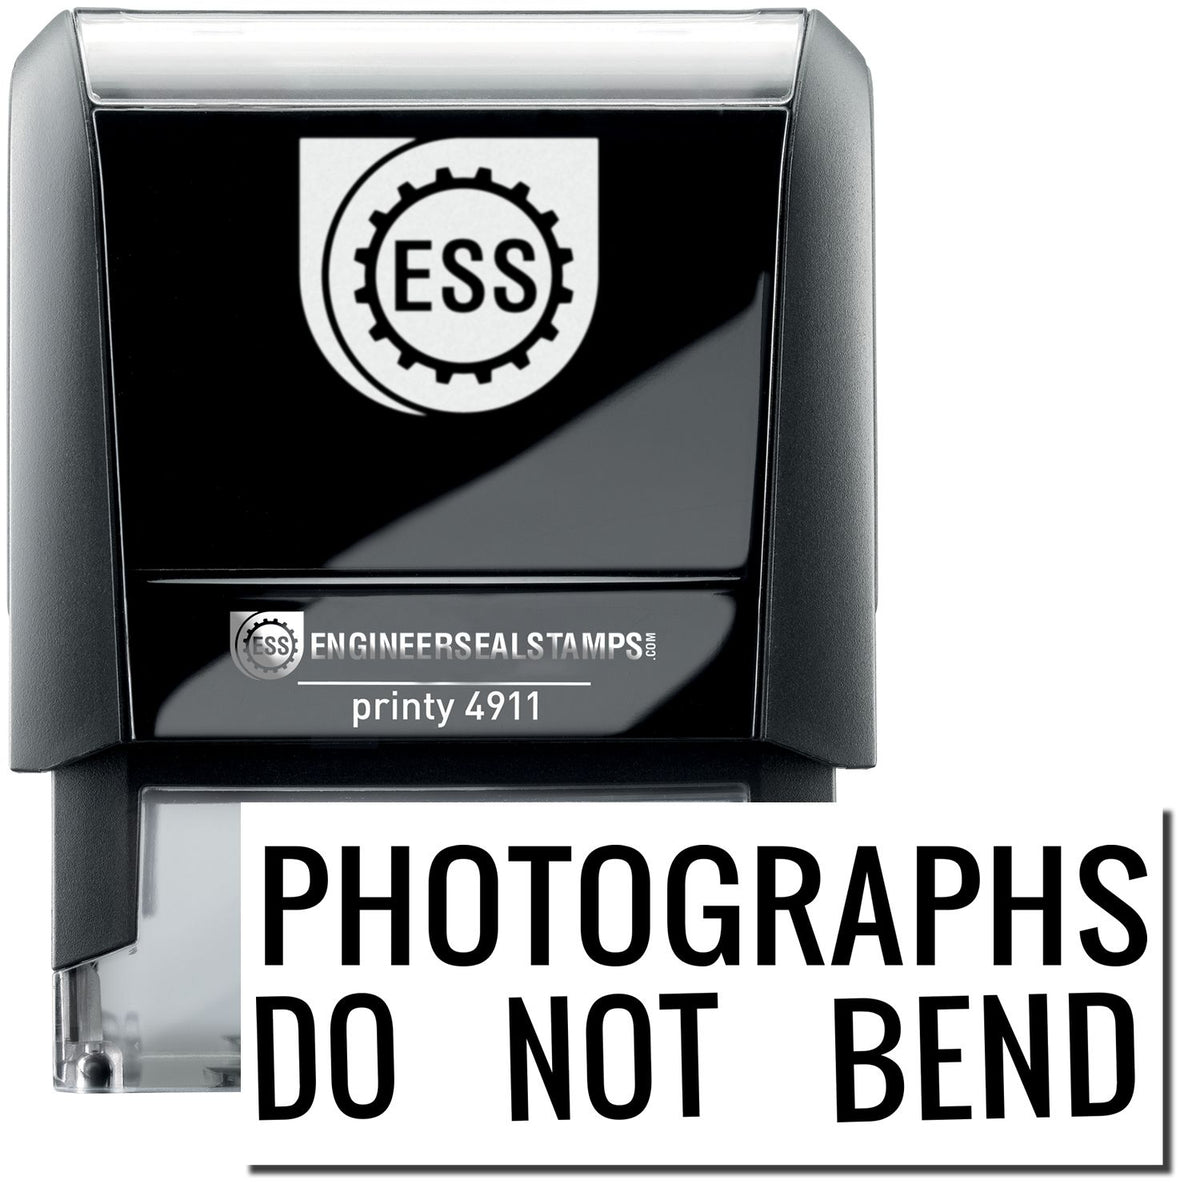 A self-inking stamp with a stamped image showing how the text &quot;PHOTOGRAPHS DO NOT BEND&quot; is displayed after stamping.